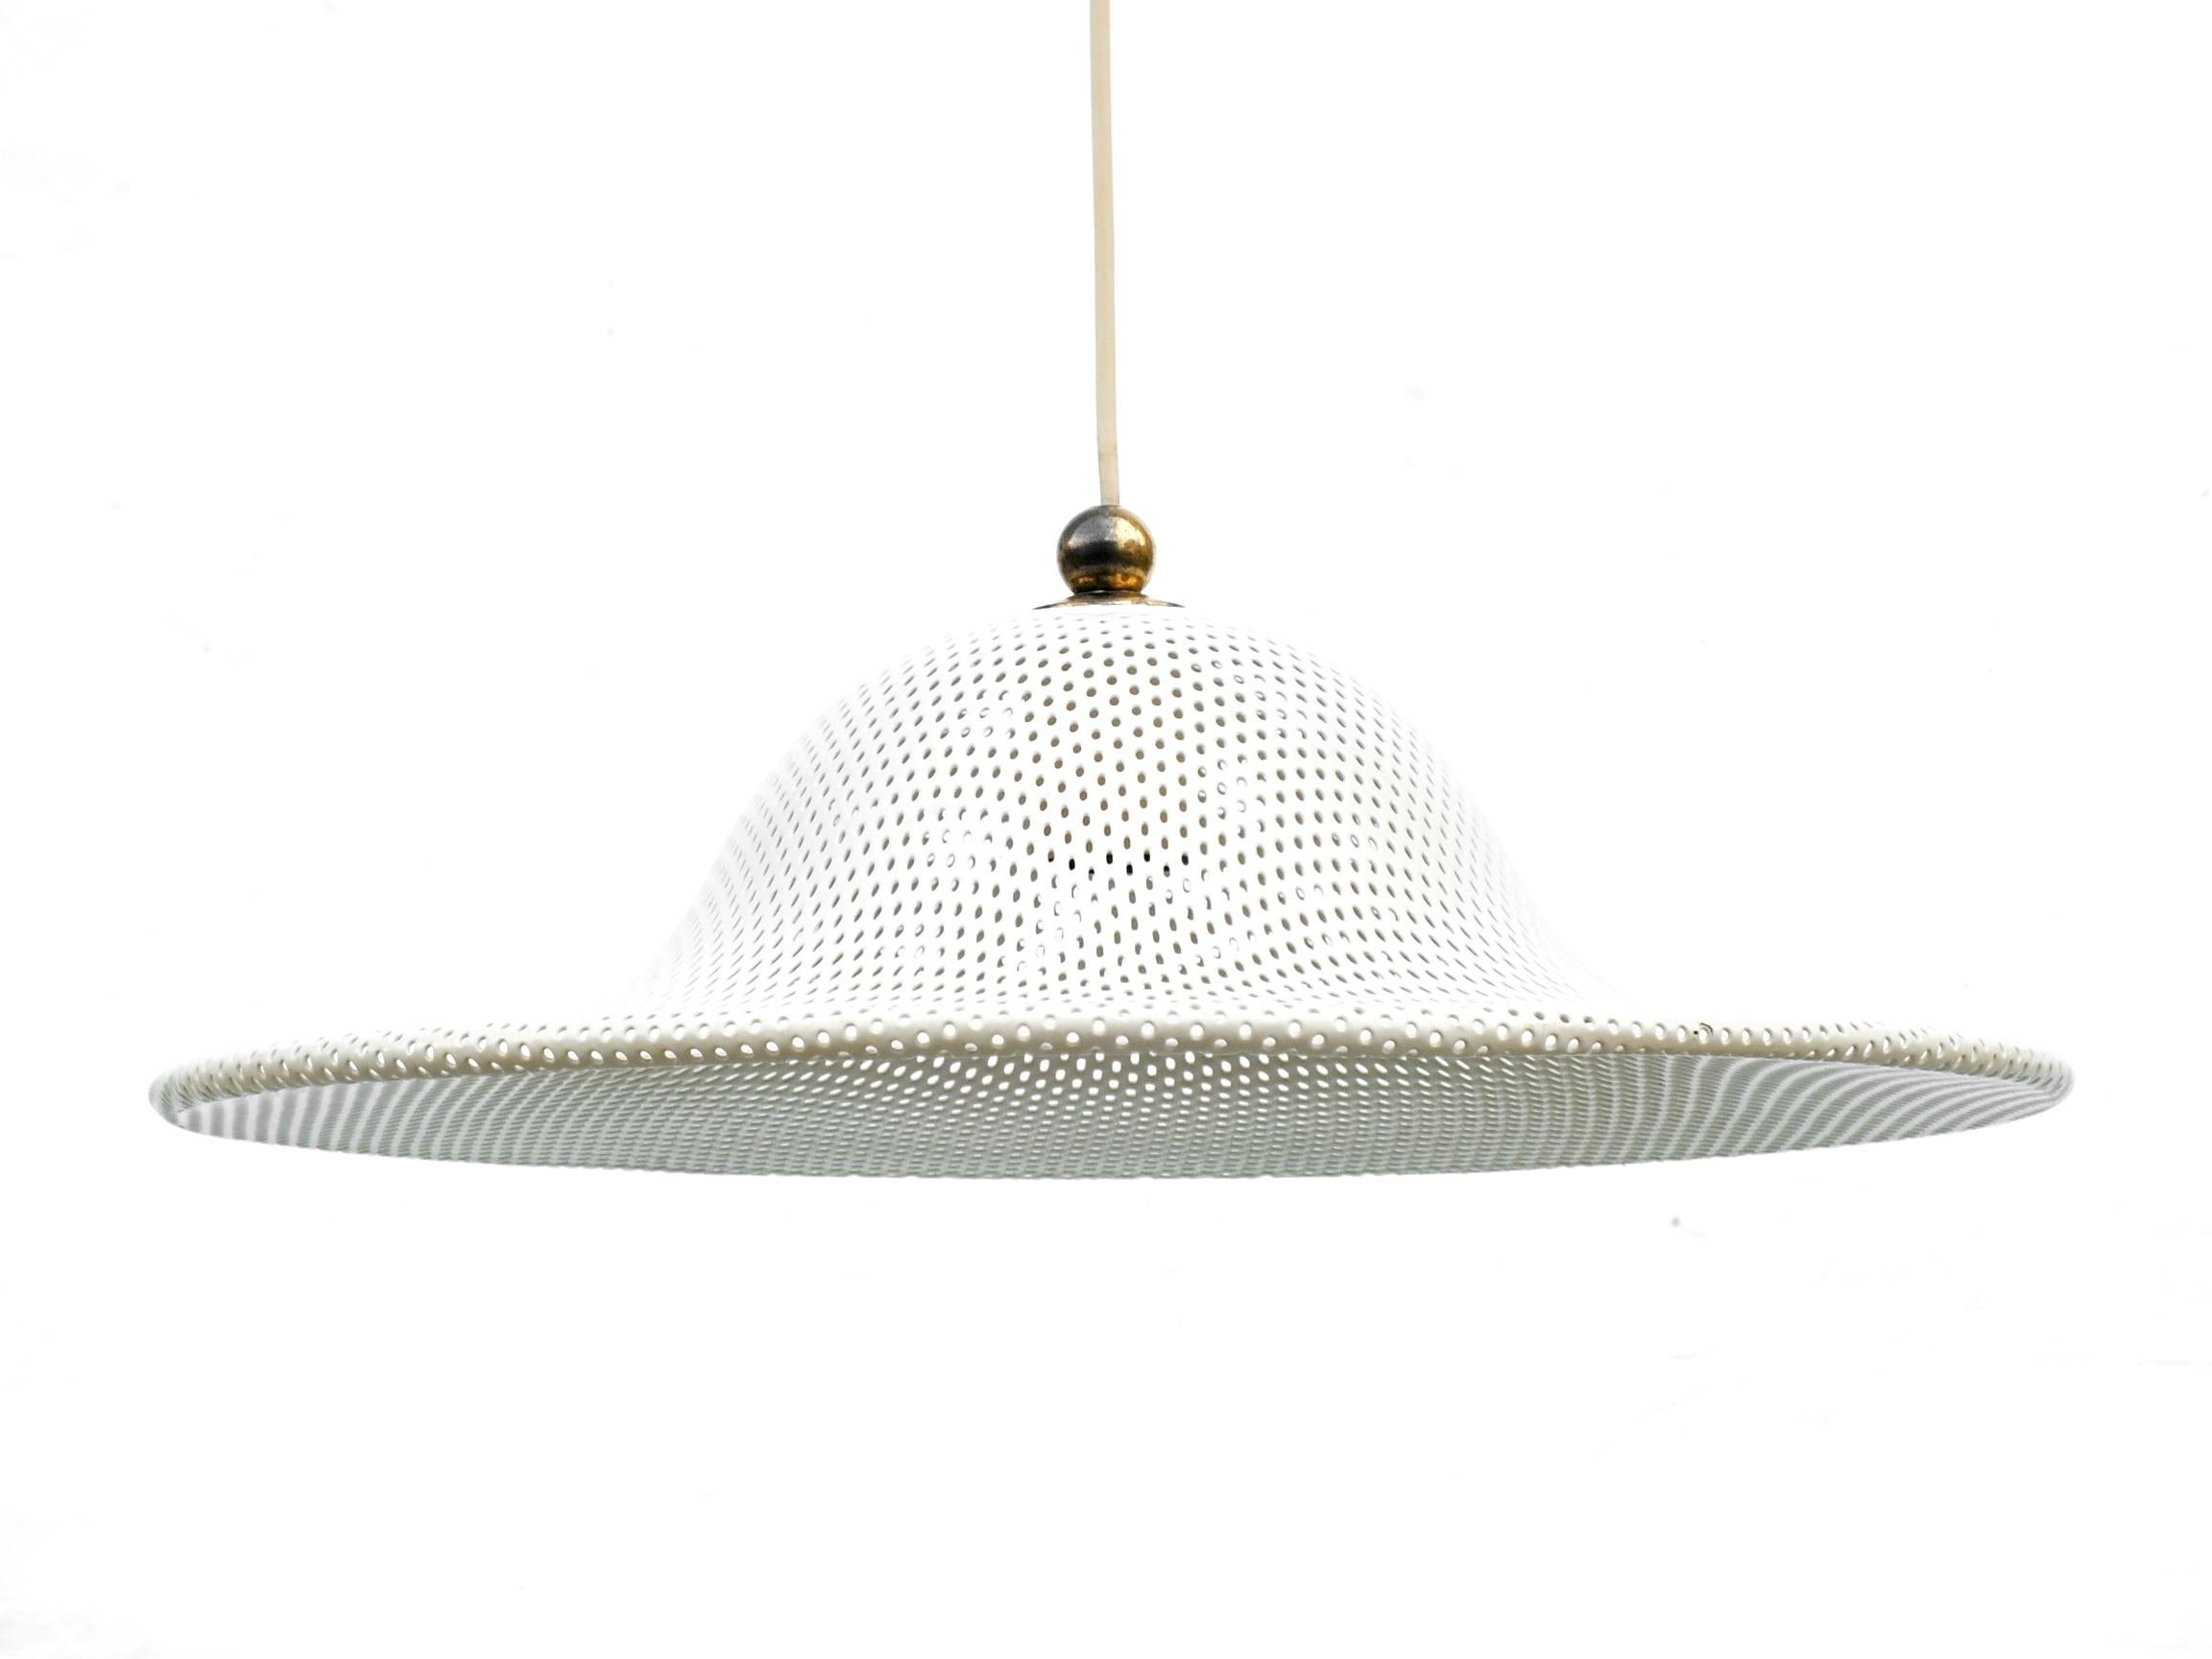 Design in year '58 ceiling lamp for Artimeta Soest Holland

 lamp is in perforated metal lacquered white-cream in perfect condition

 measure height 30 inches, diameter 18